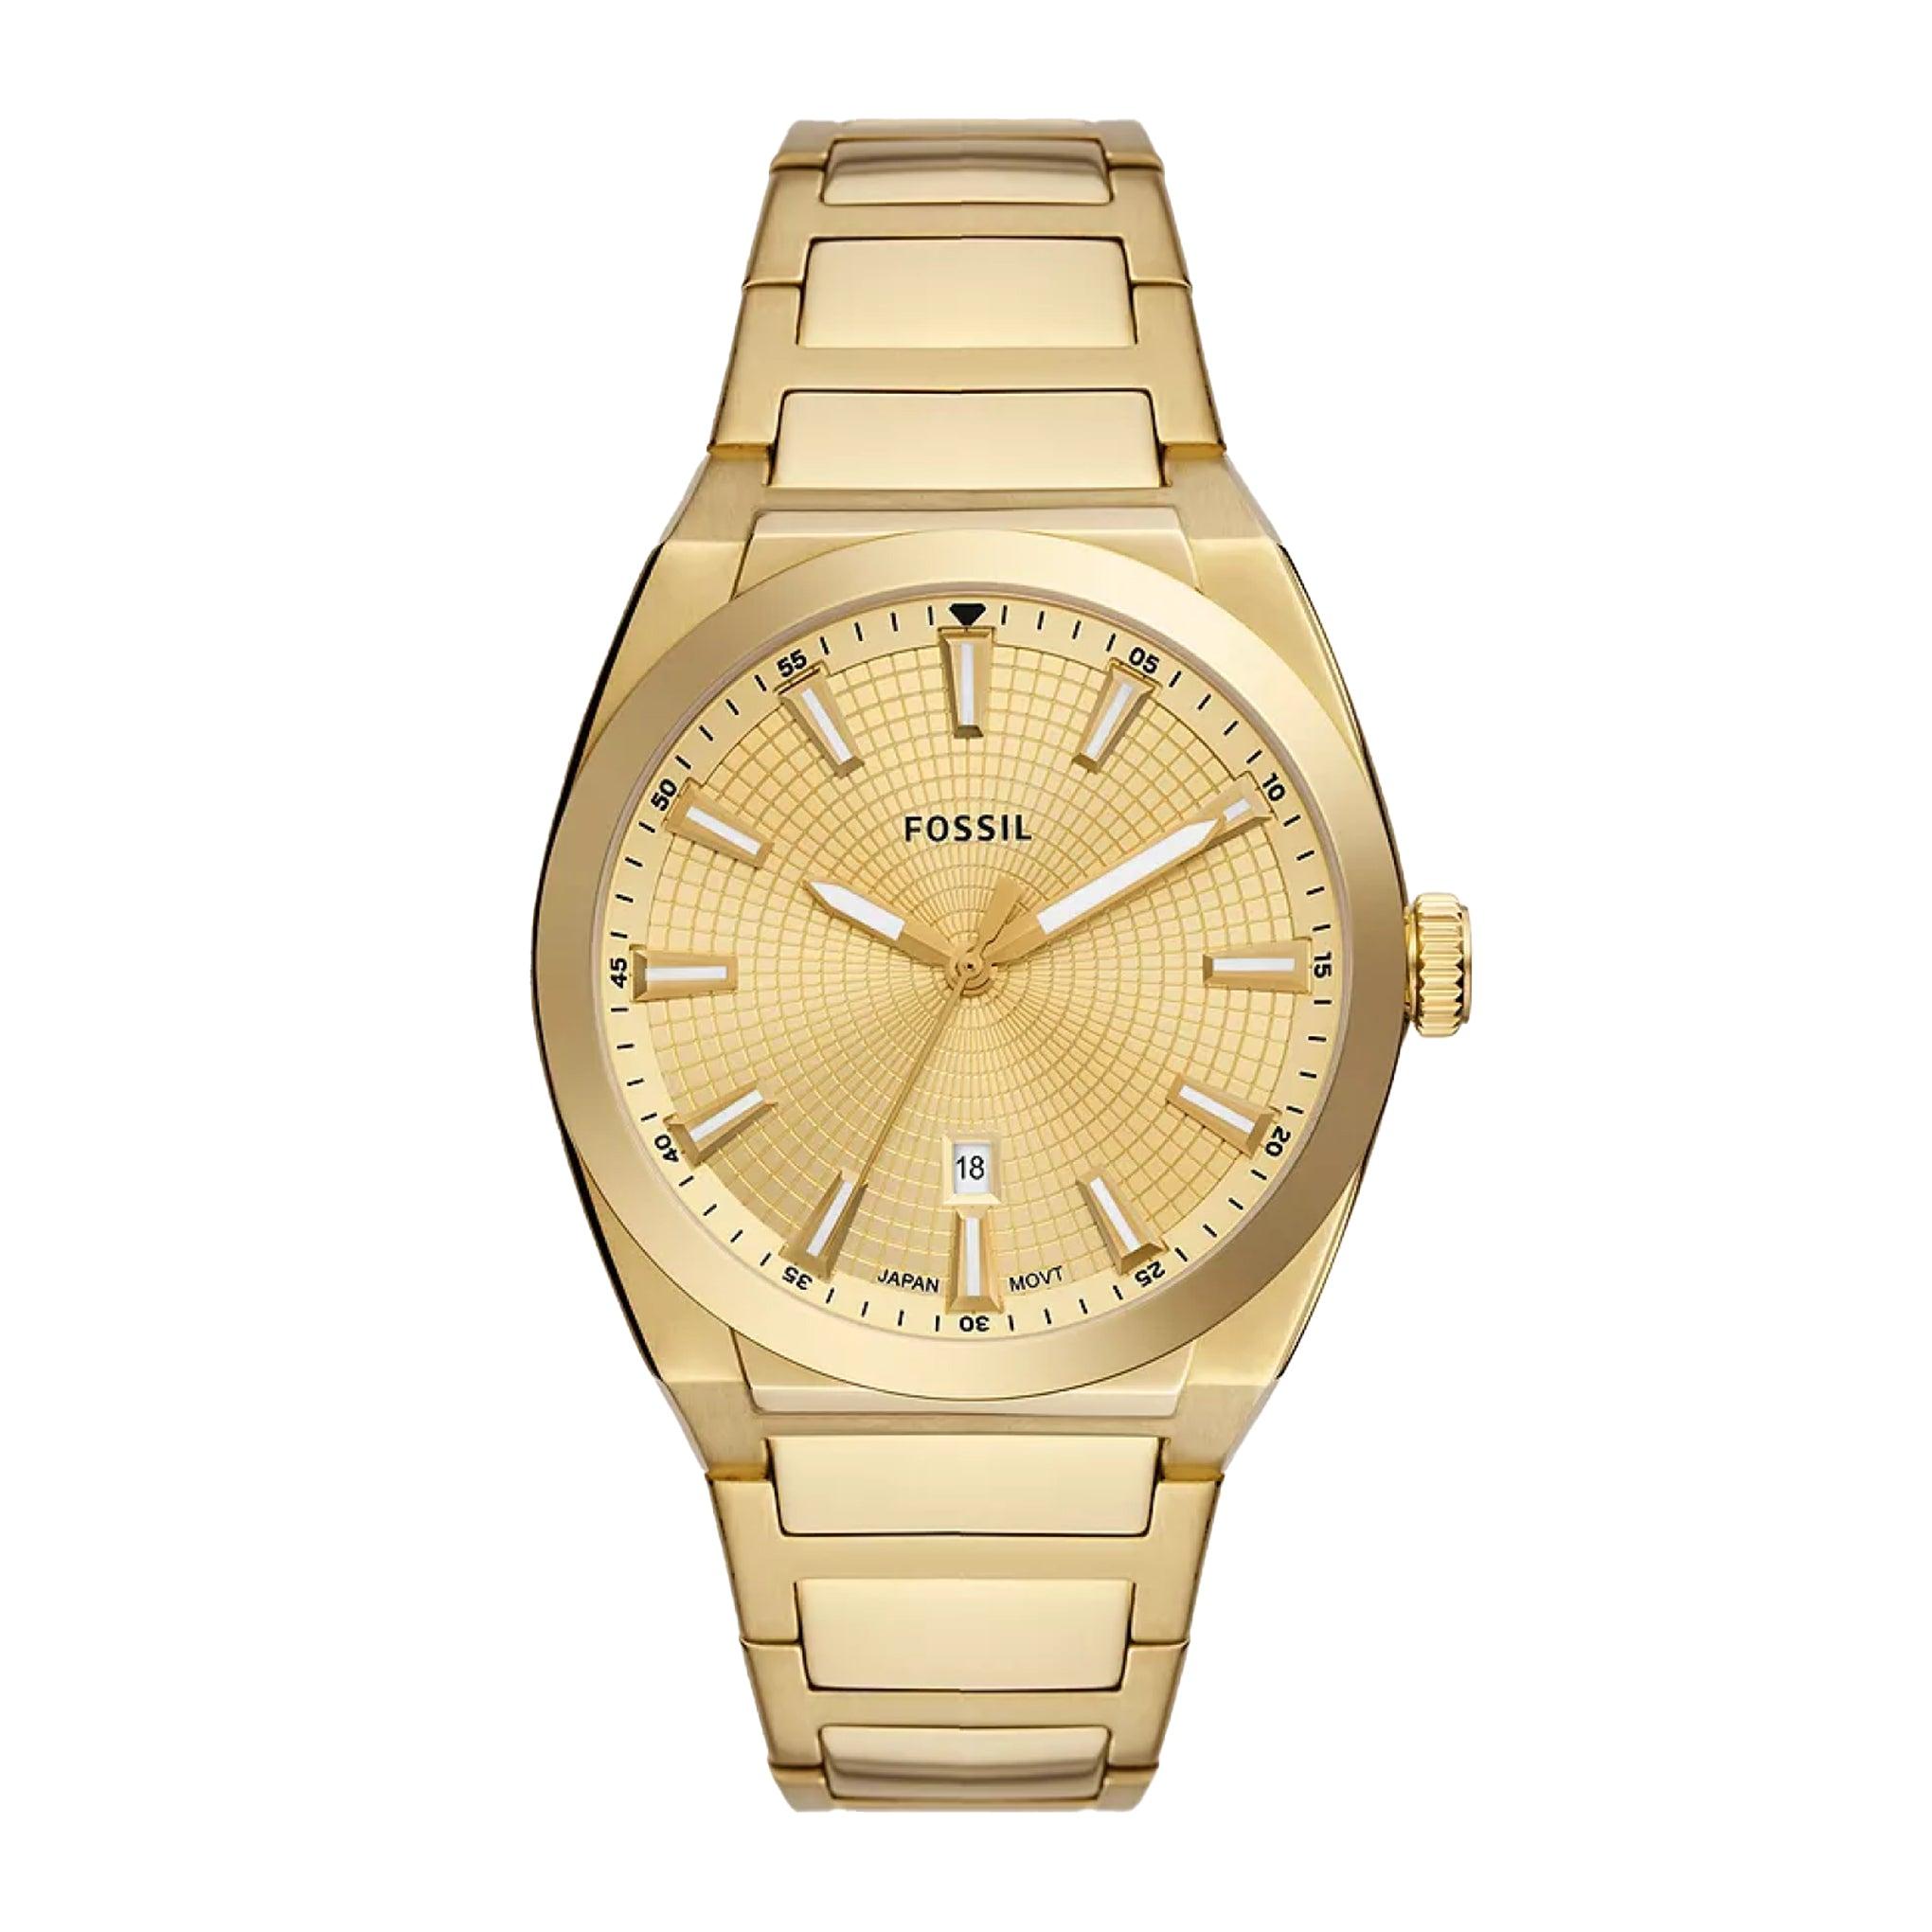 Fossil Men's Everett Three-Hand Date Gold-Tone Stainless Steel Watch Fs5965